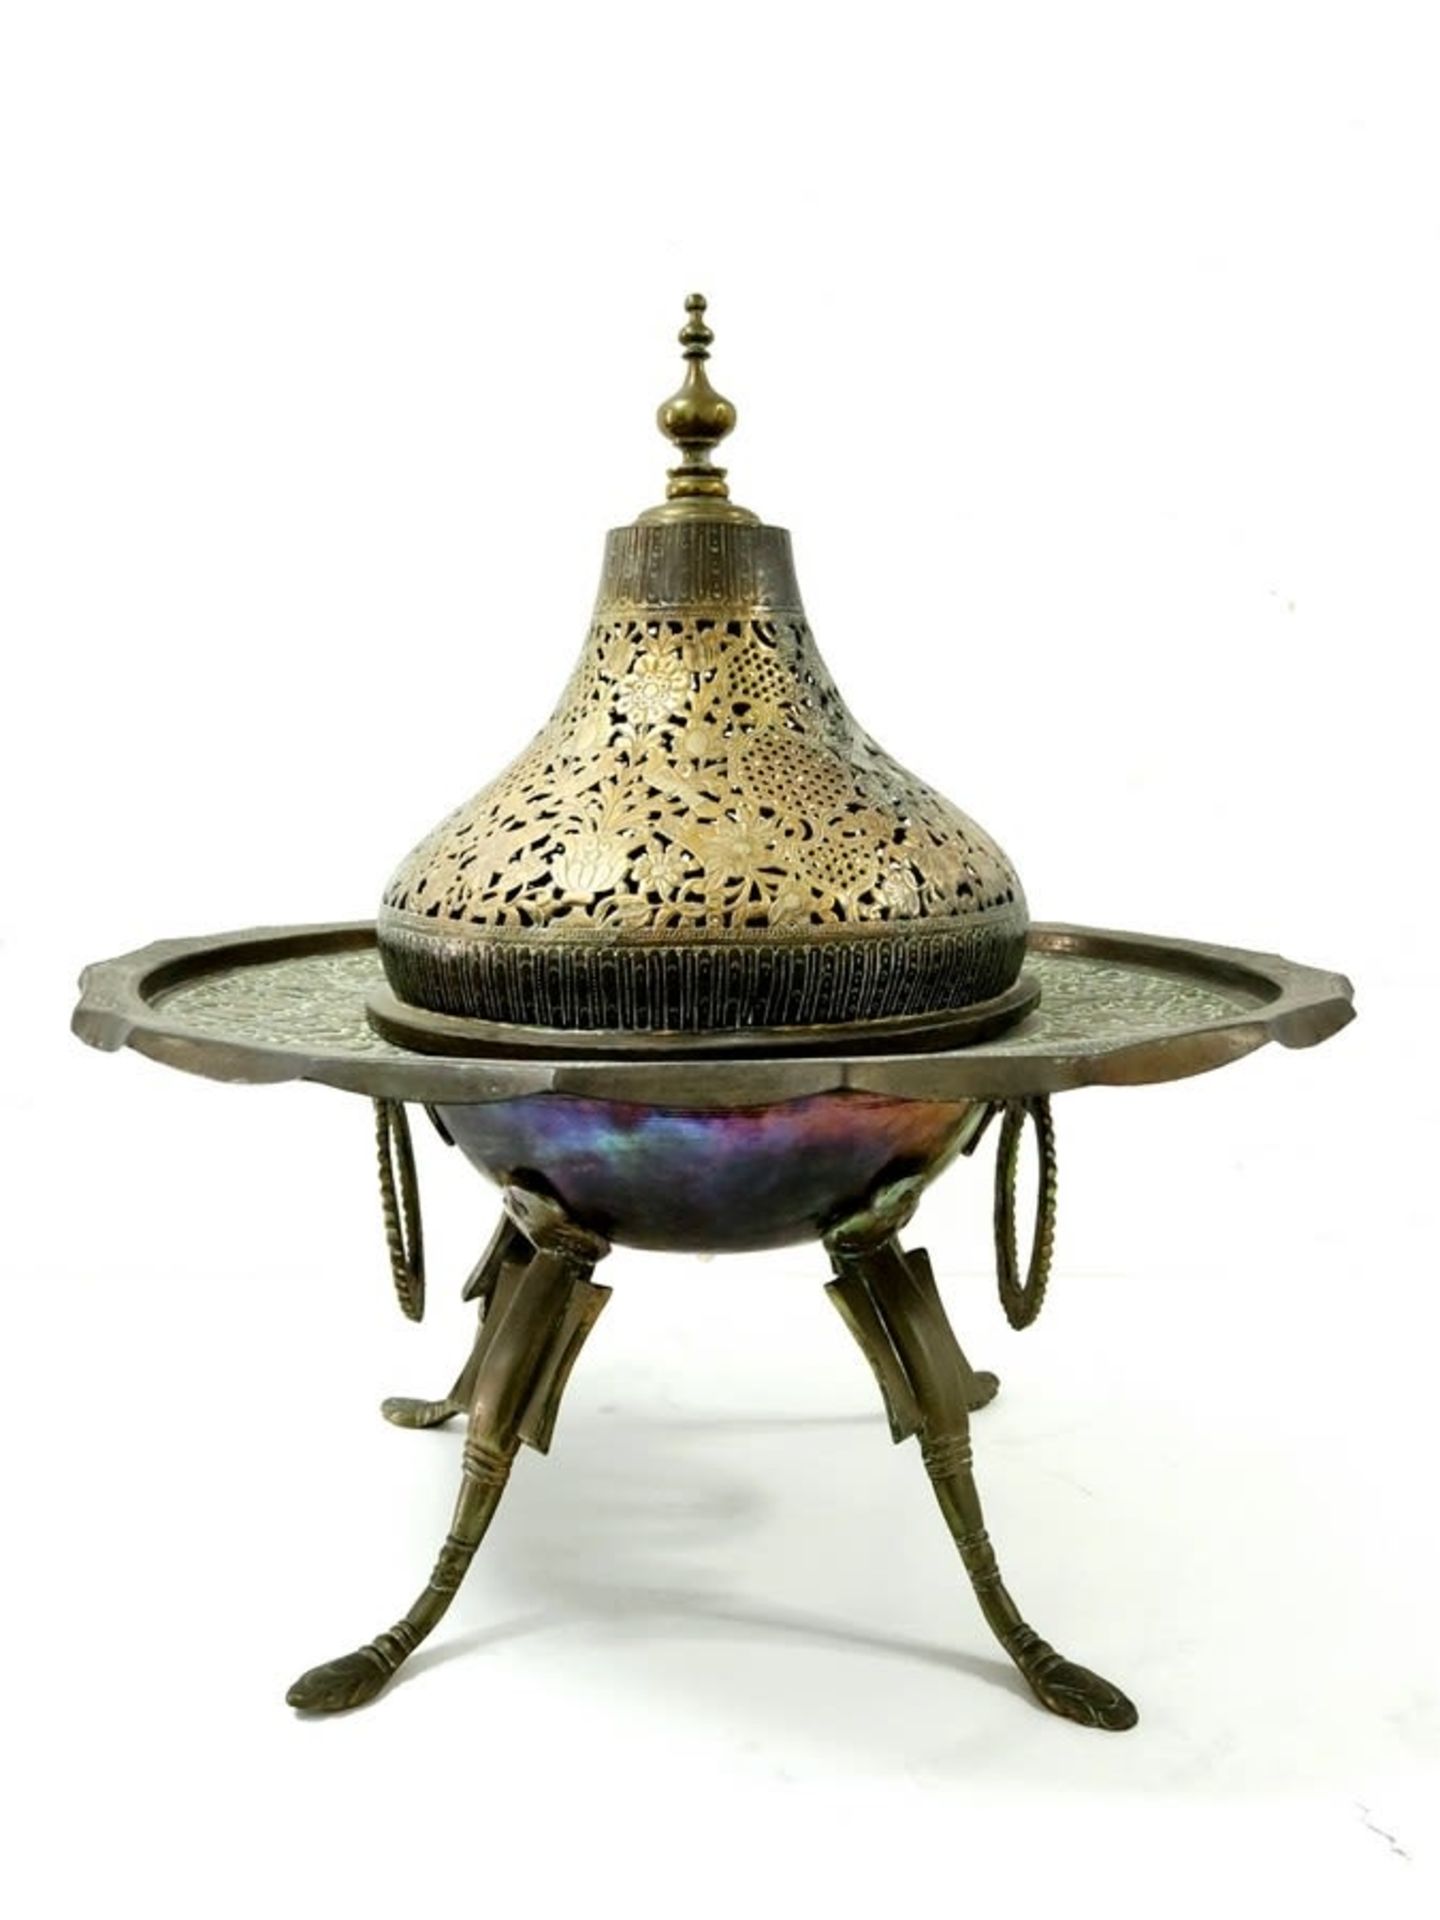 Impressive and high-quality antique Ottoman Turkish brazier, made of hammered and engraved sawn